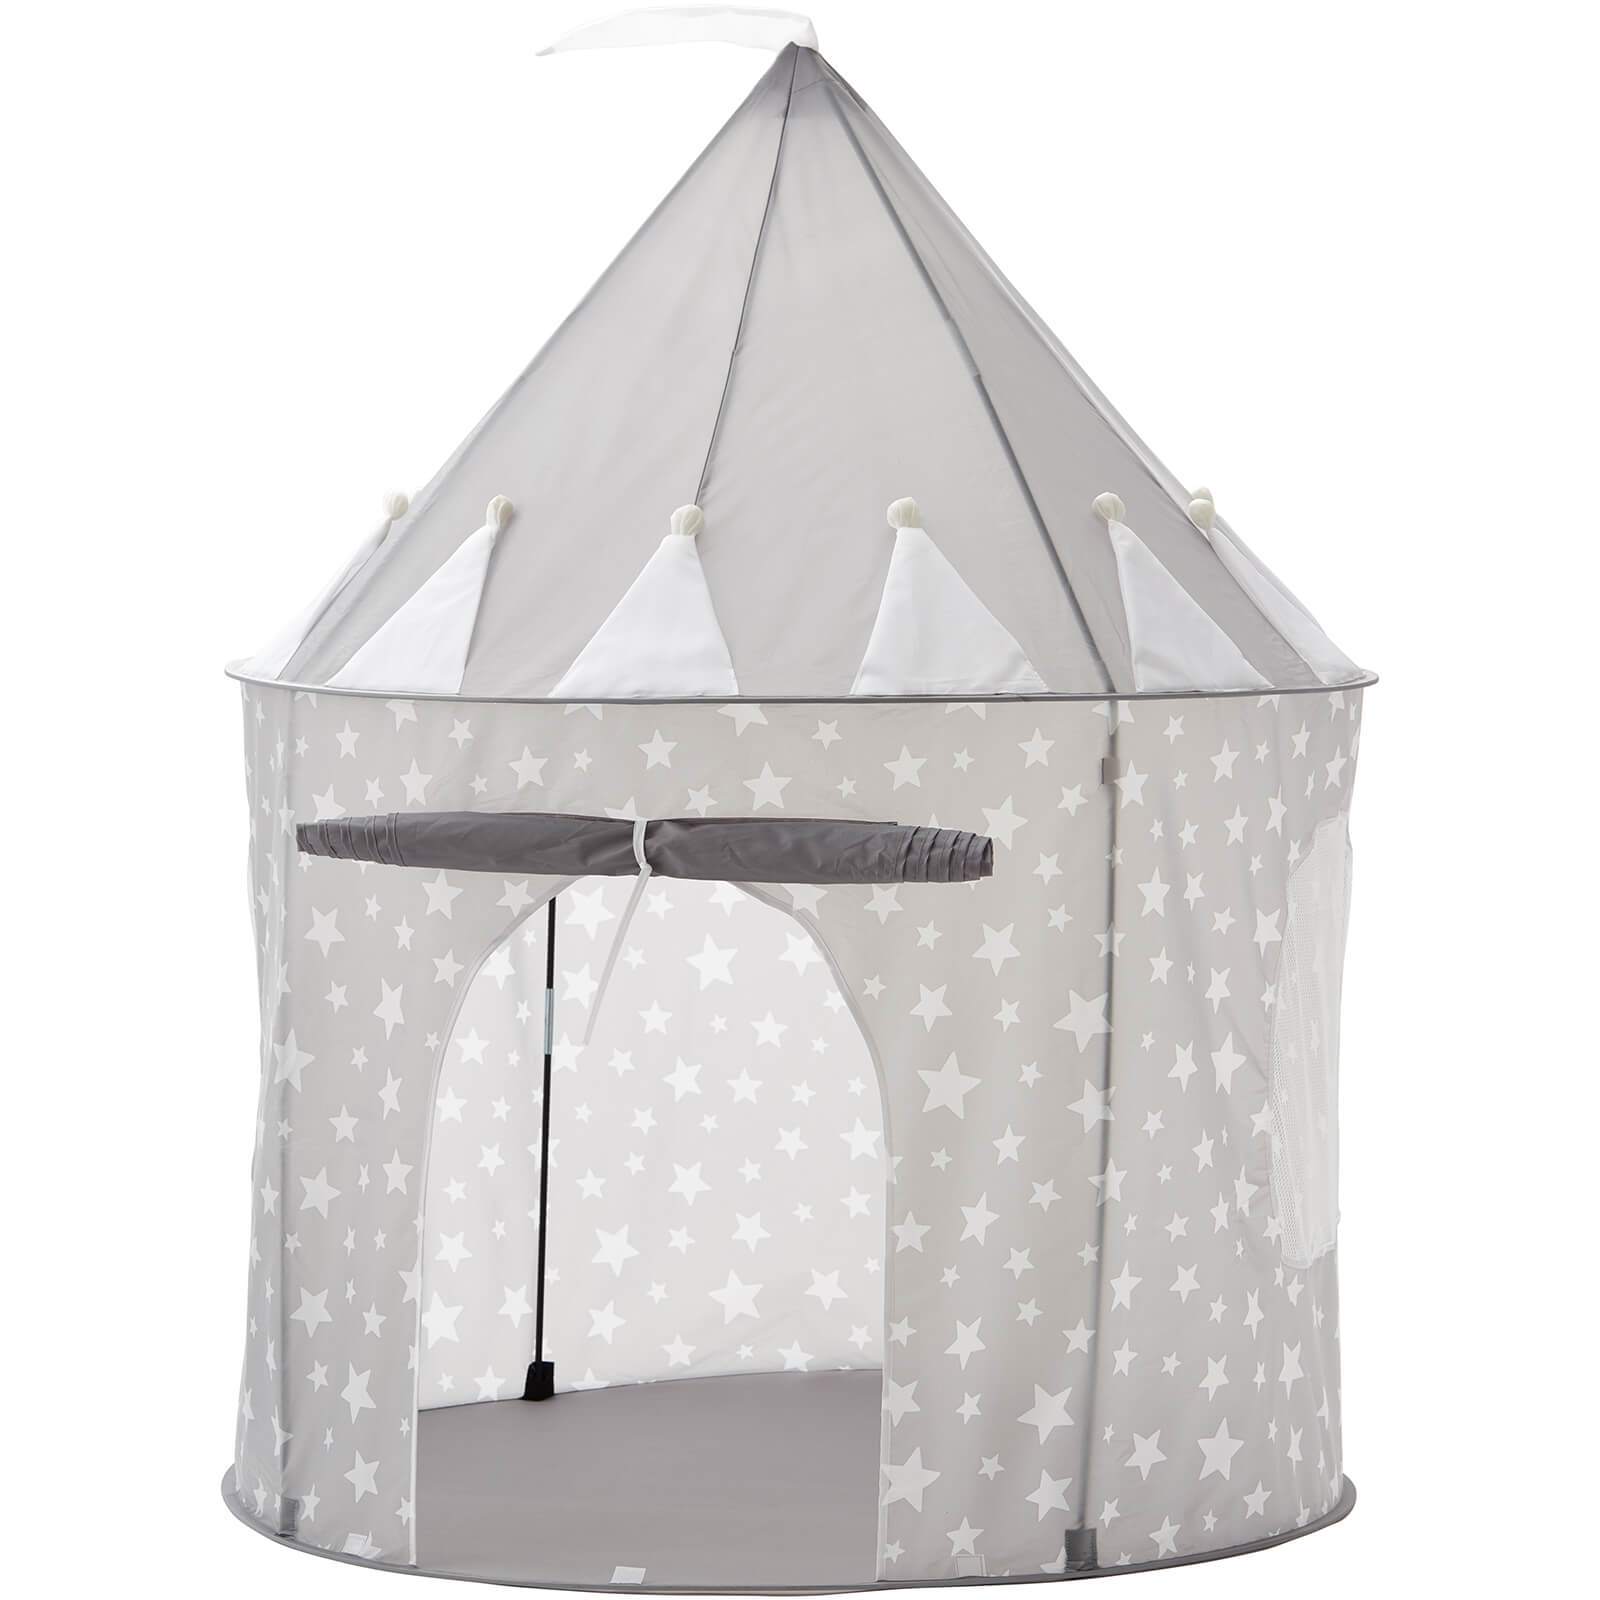 Photos - Other Toys Kids Concept Star Play Tent - Grey 1000189 